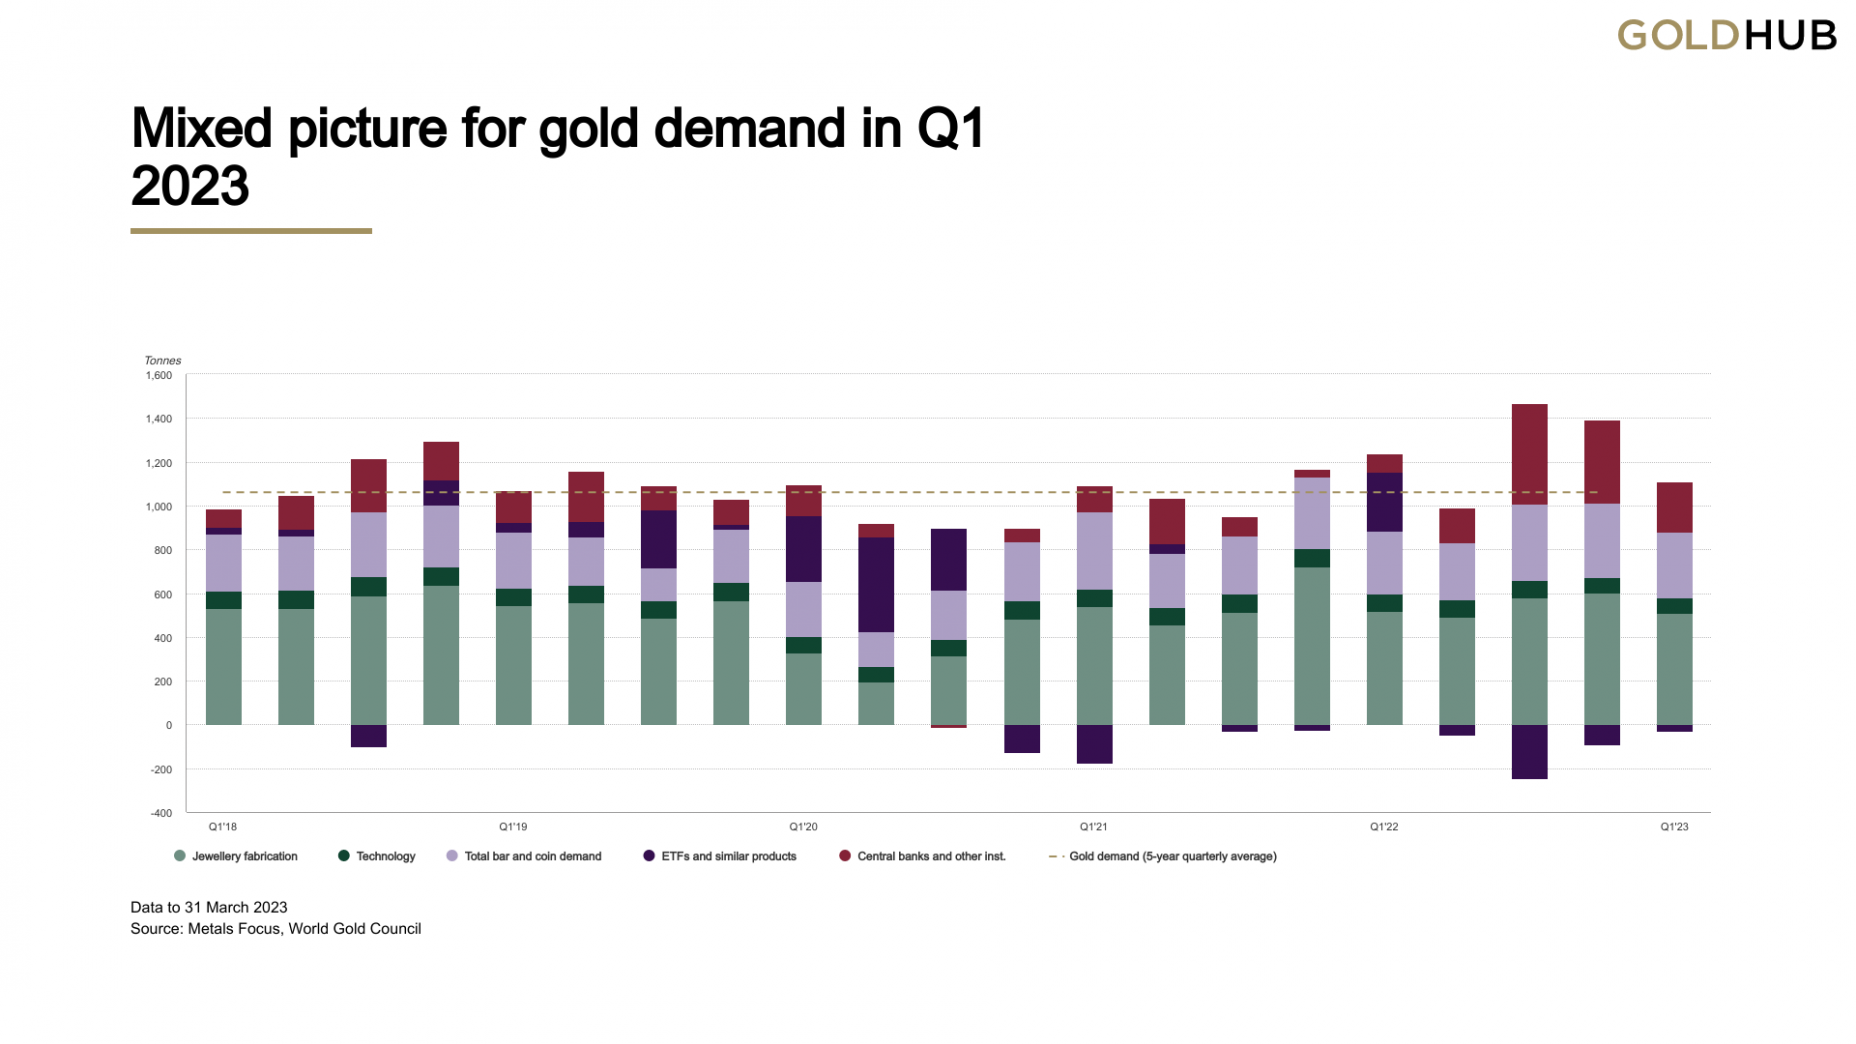 Gold demand trends according to the World Gold Council